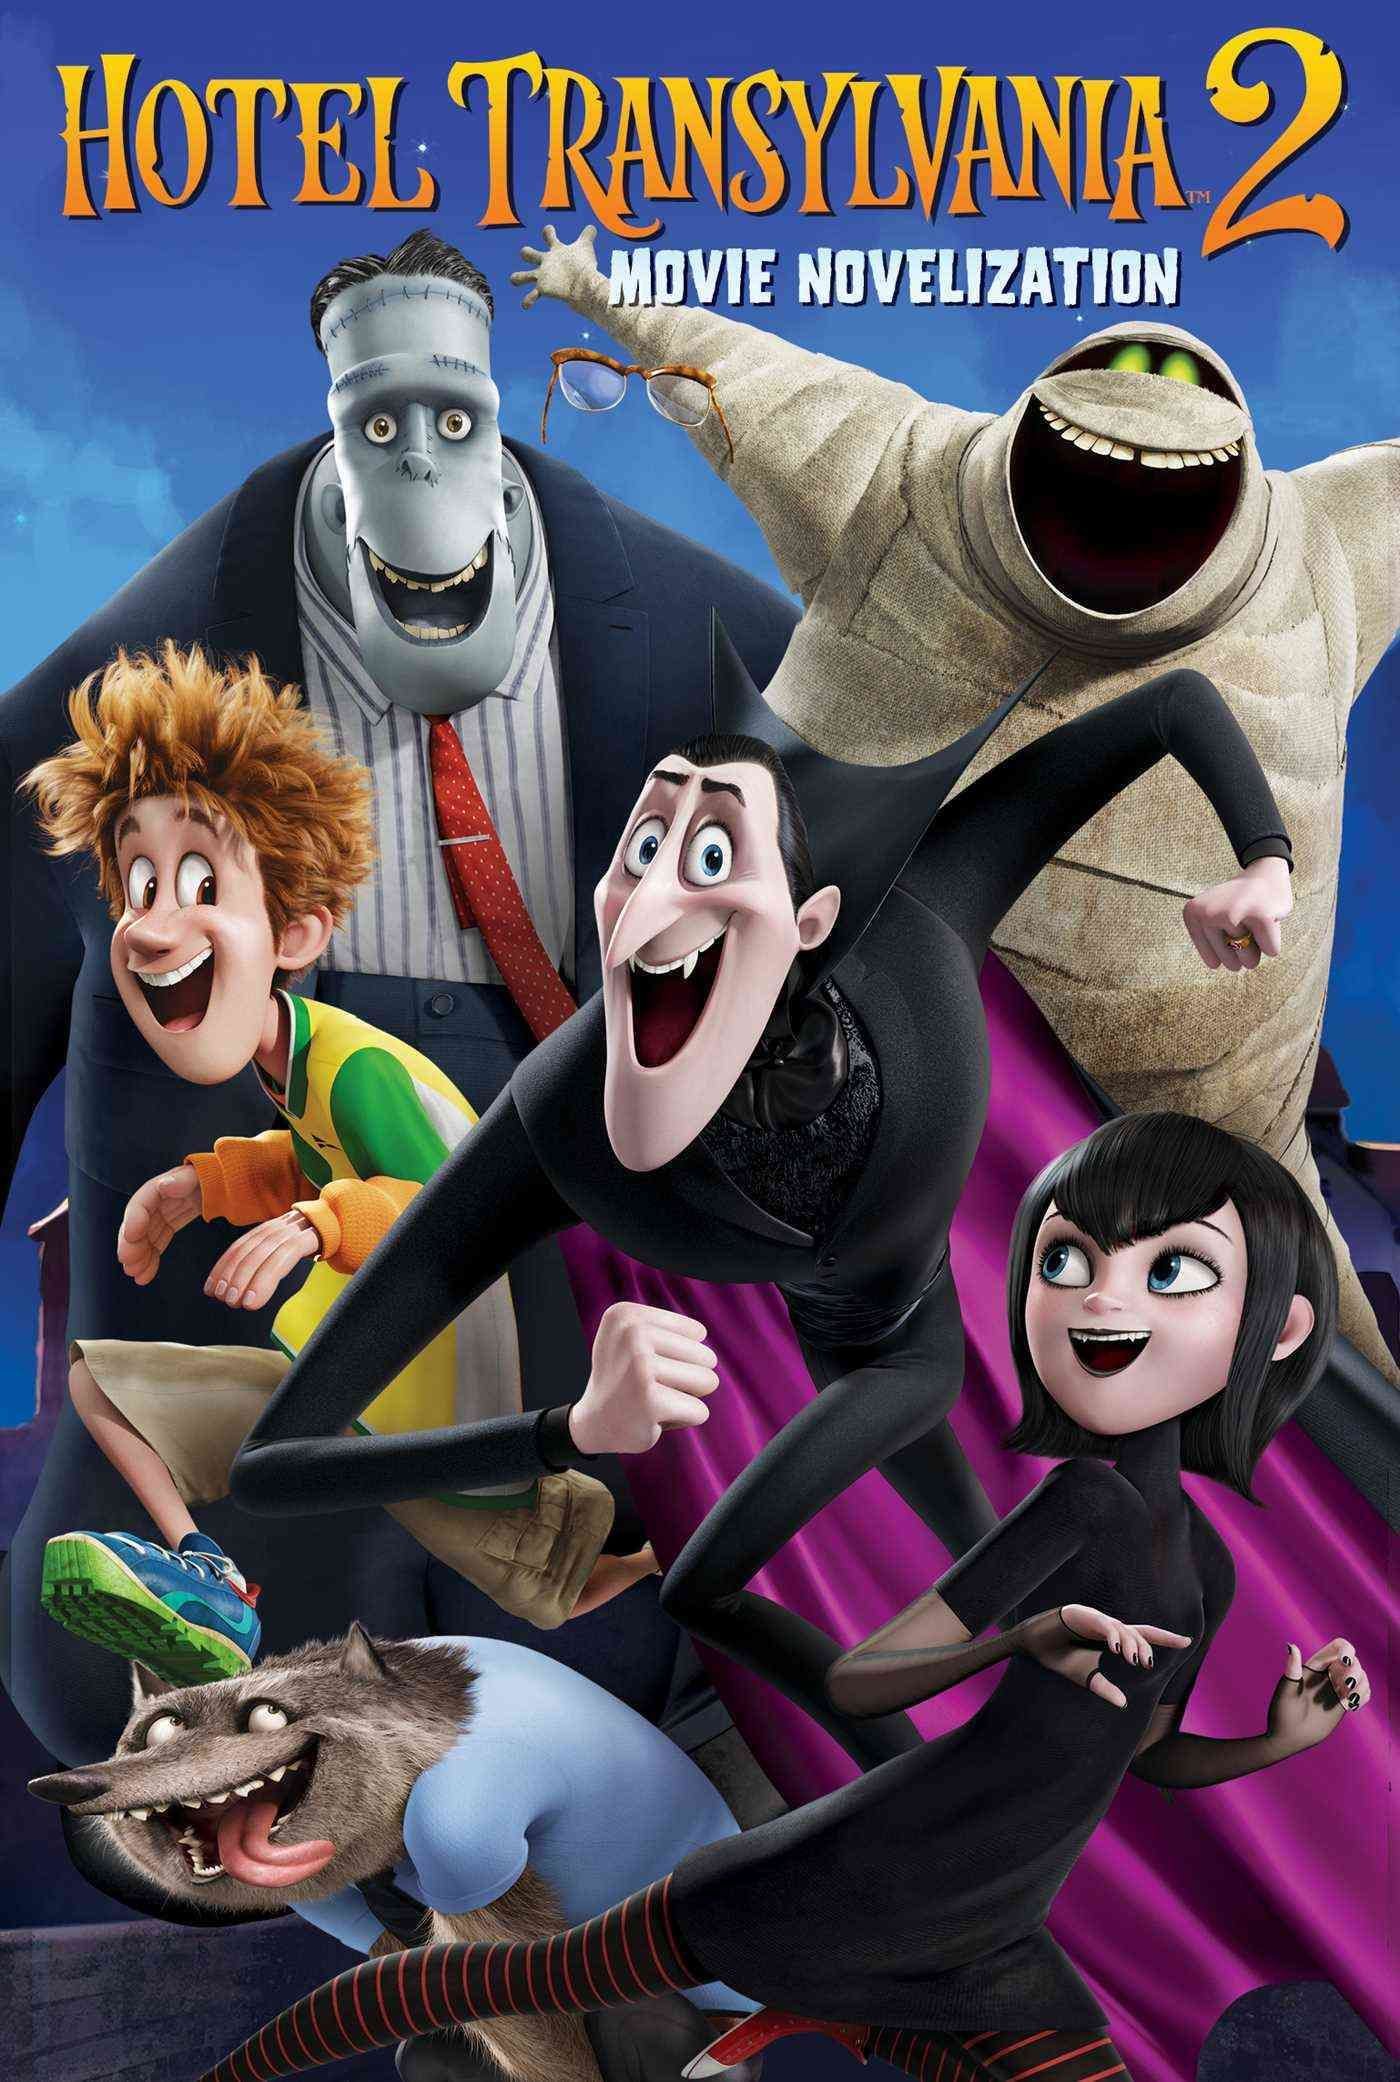 anders sjostrand recommends hotel transylvania 2 free online movie pic